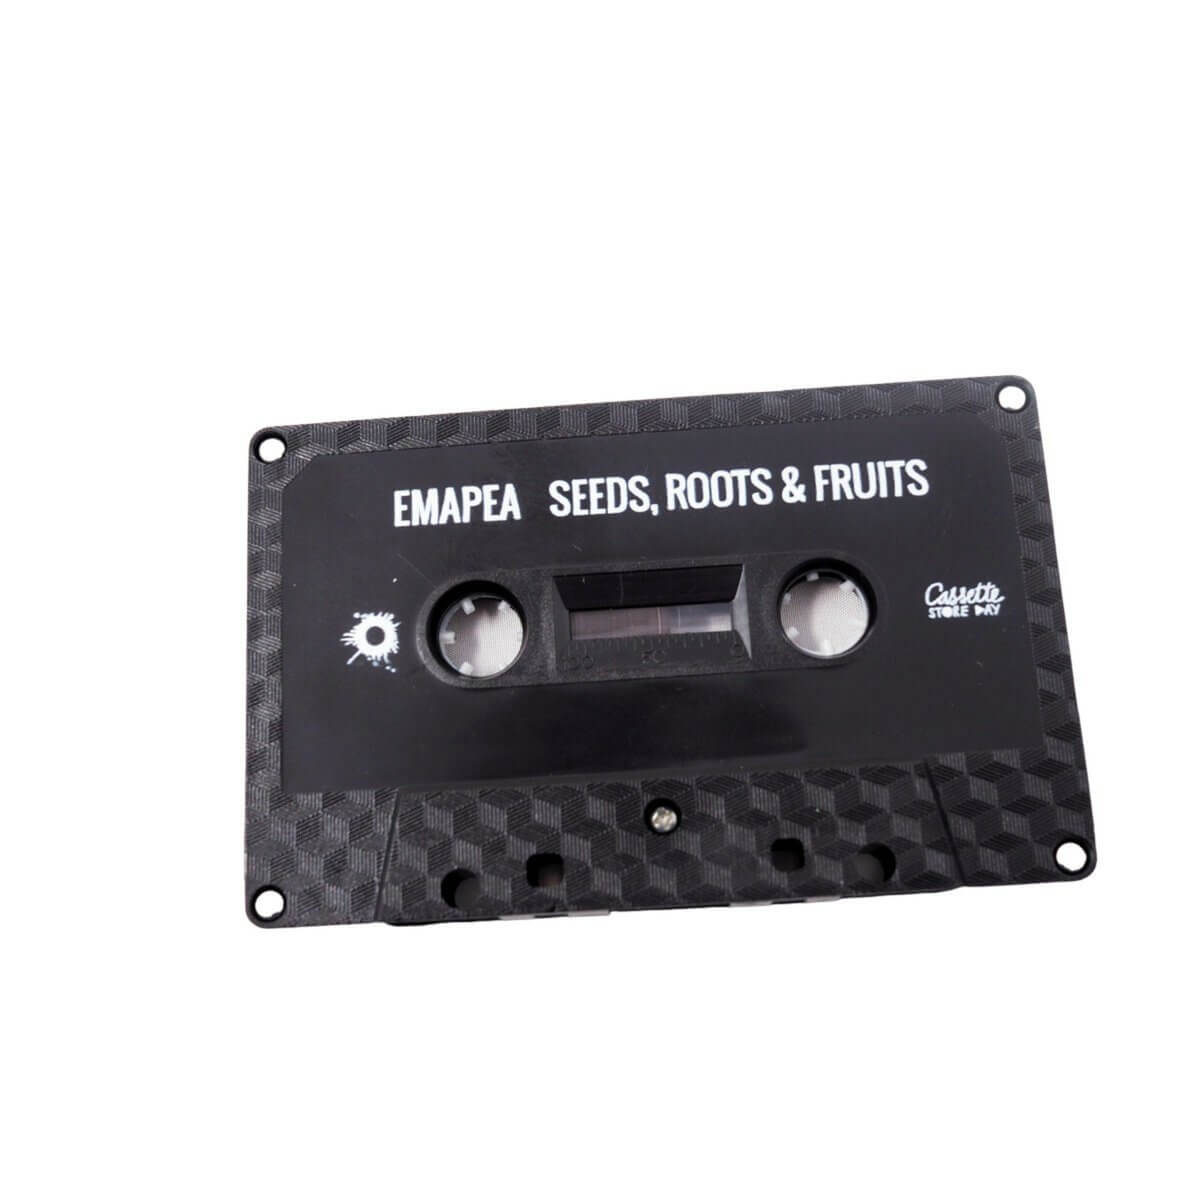 Emapea - Seeds, Roots & Fruits - Limited Edition Cassette (CSD 2017) - Cold Busted